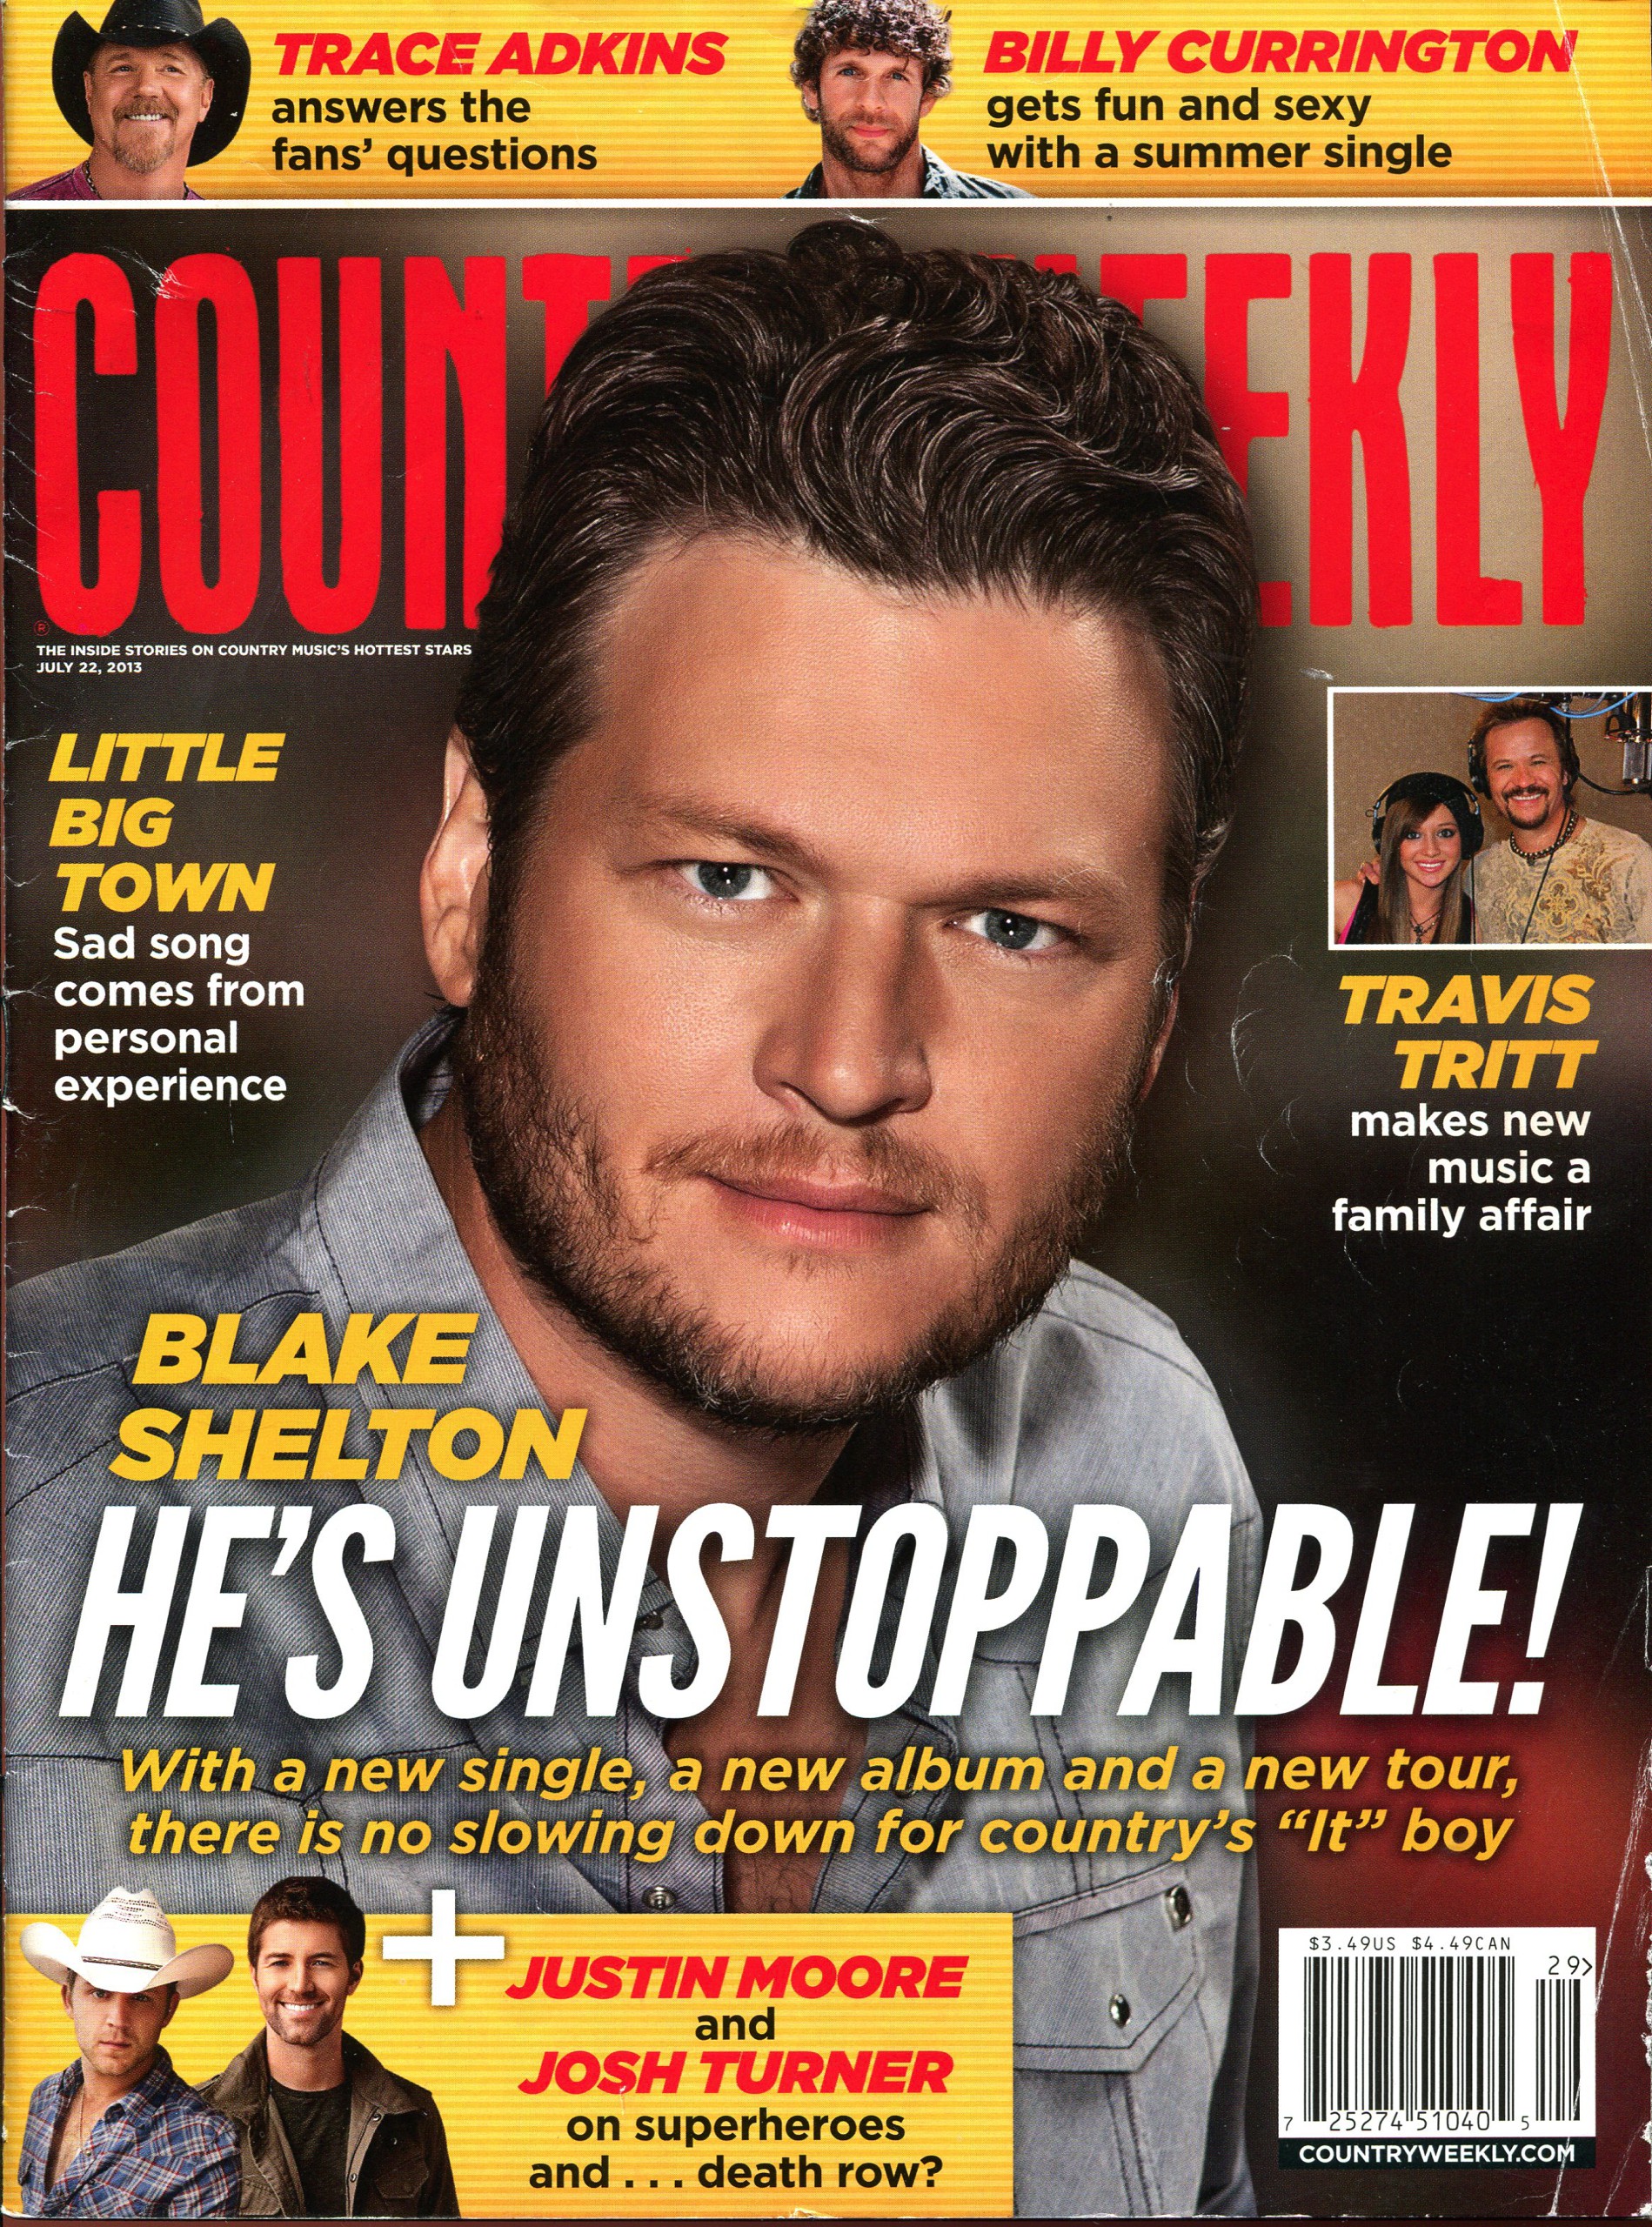 Country Weekly - July 22nd 2013